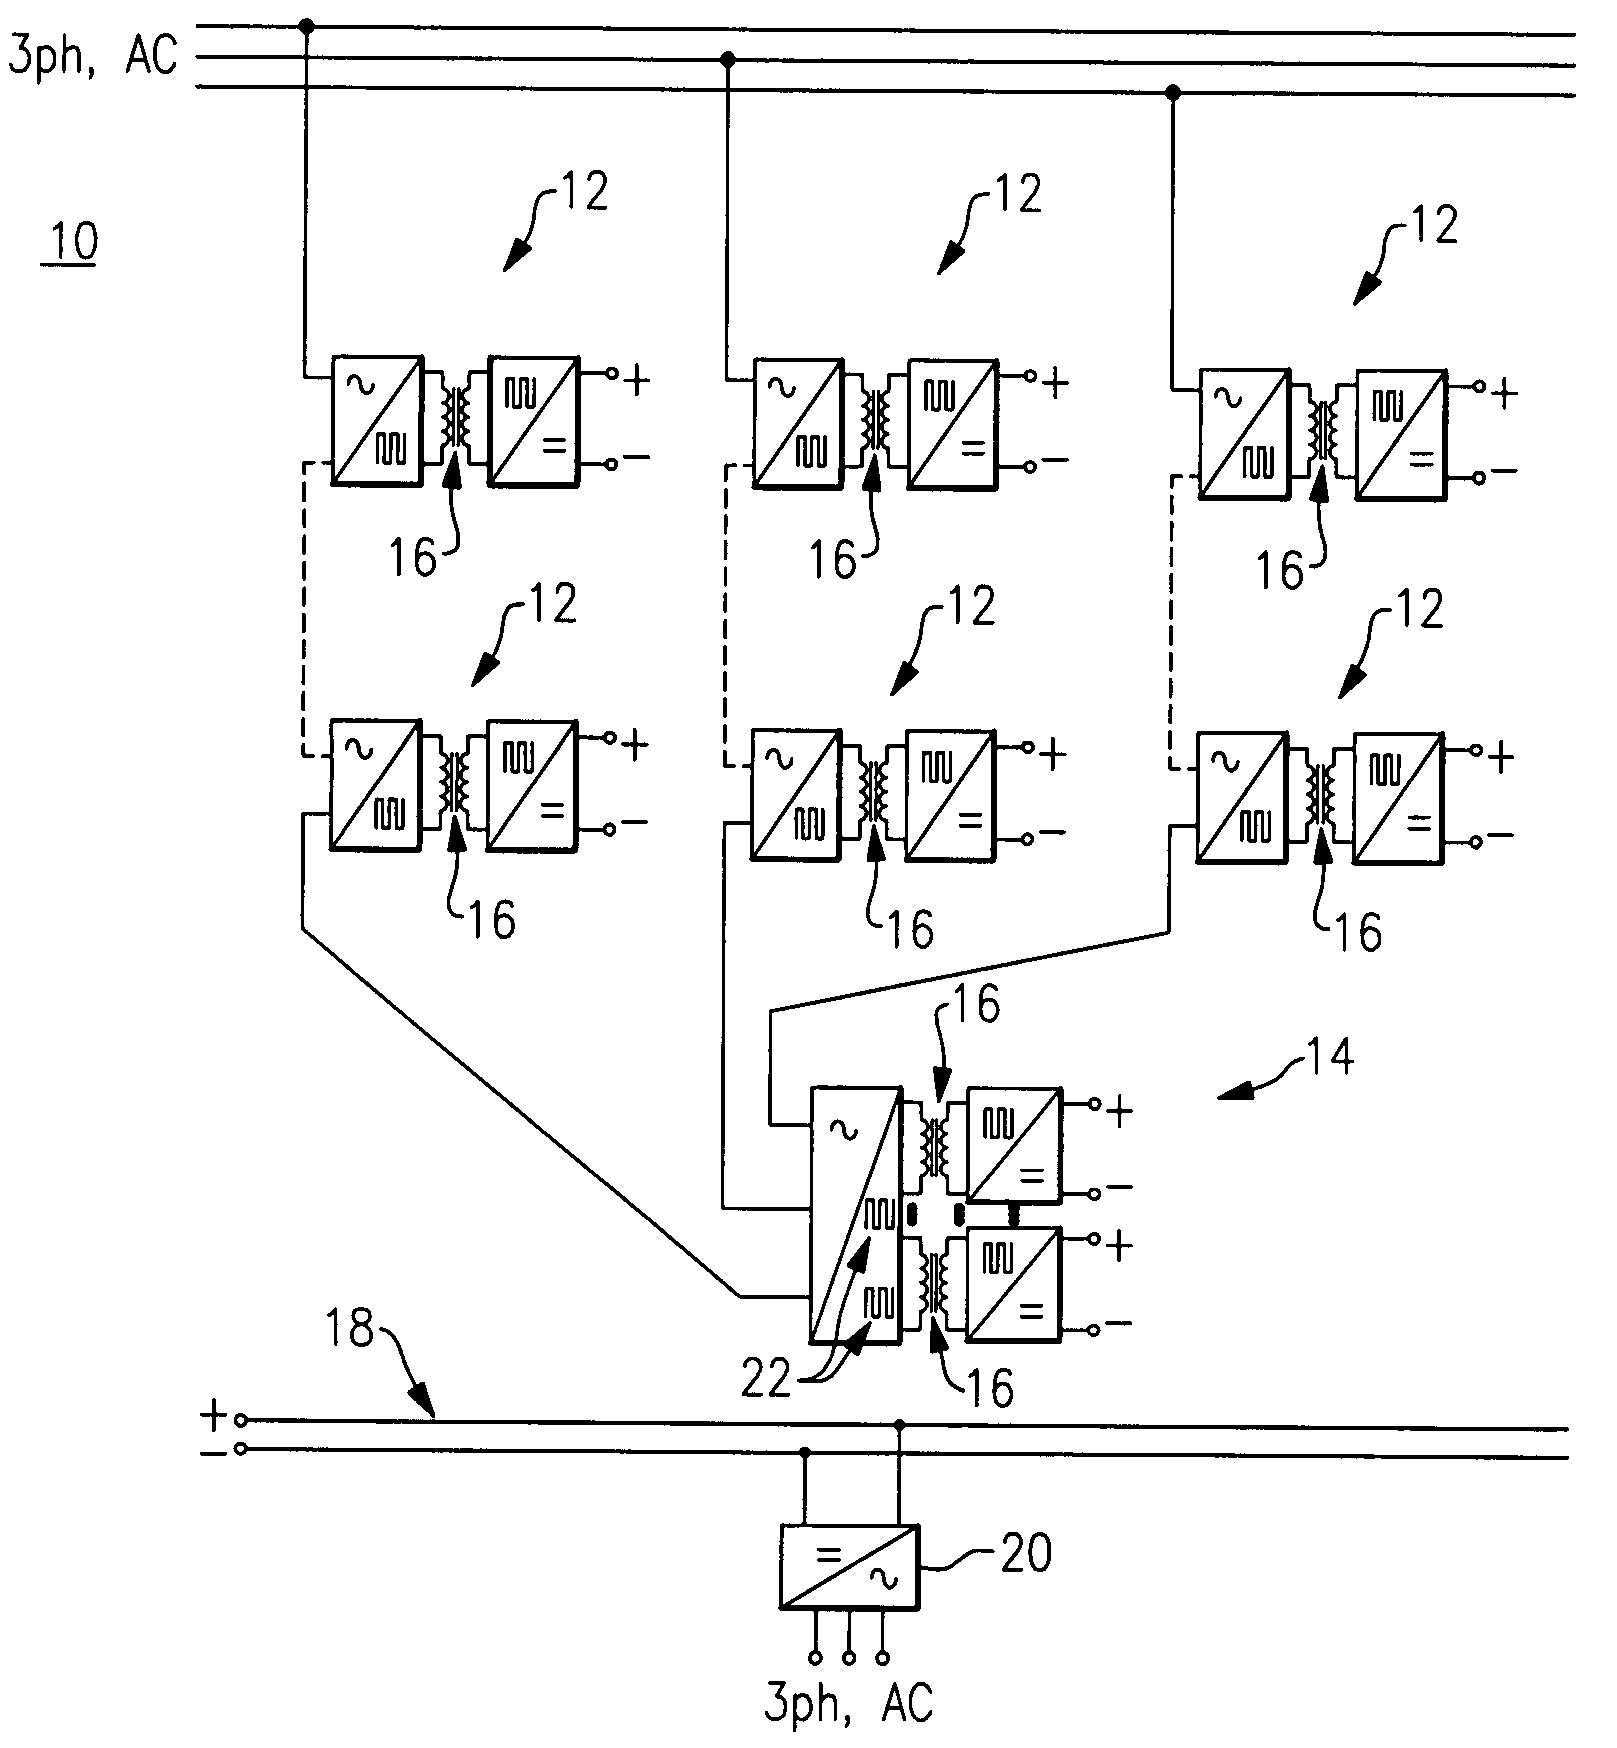 Power conversion system with galvanically isolated high frequency link